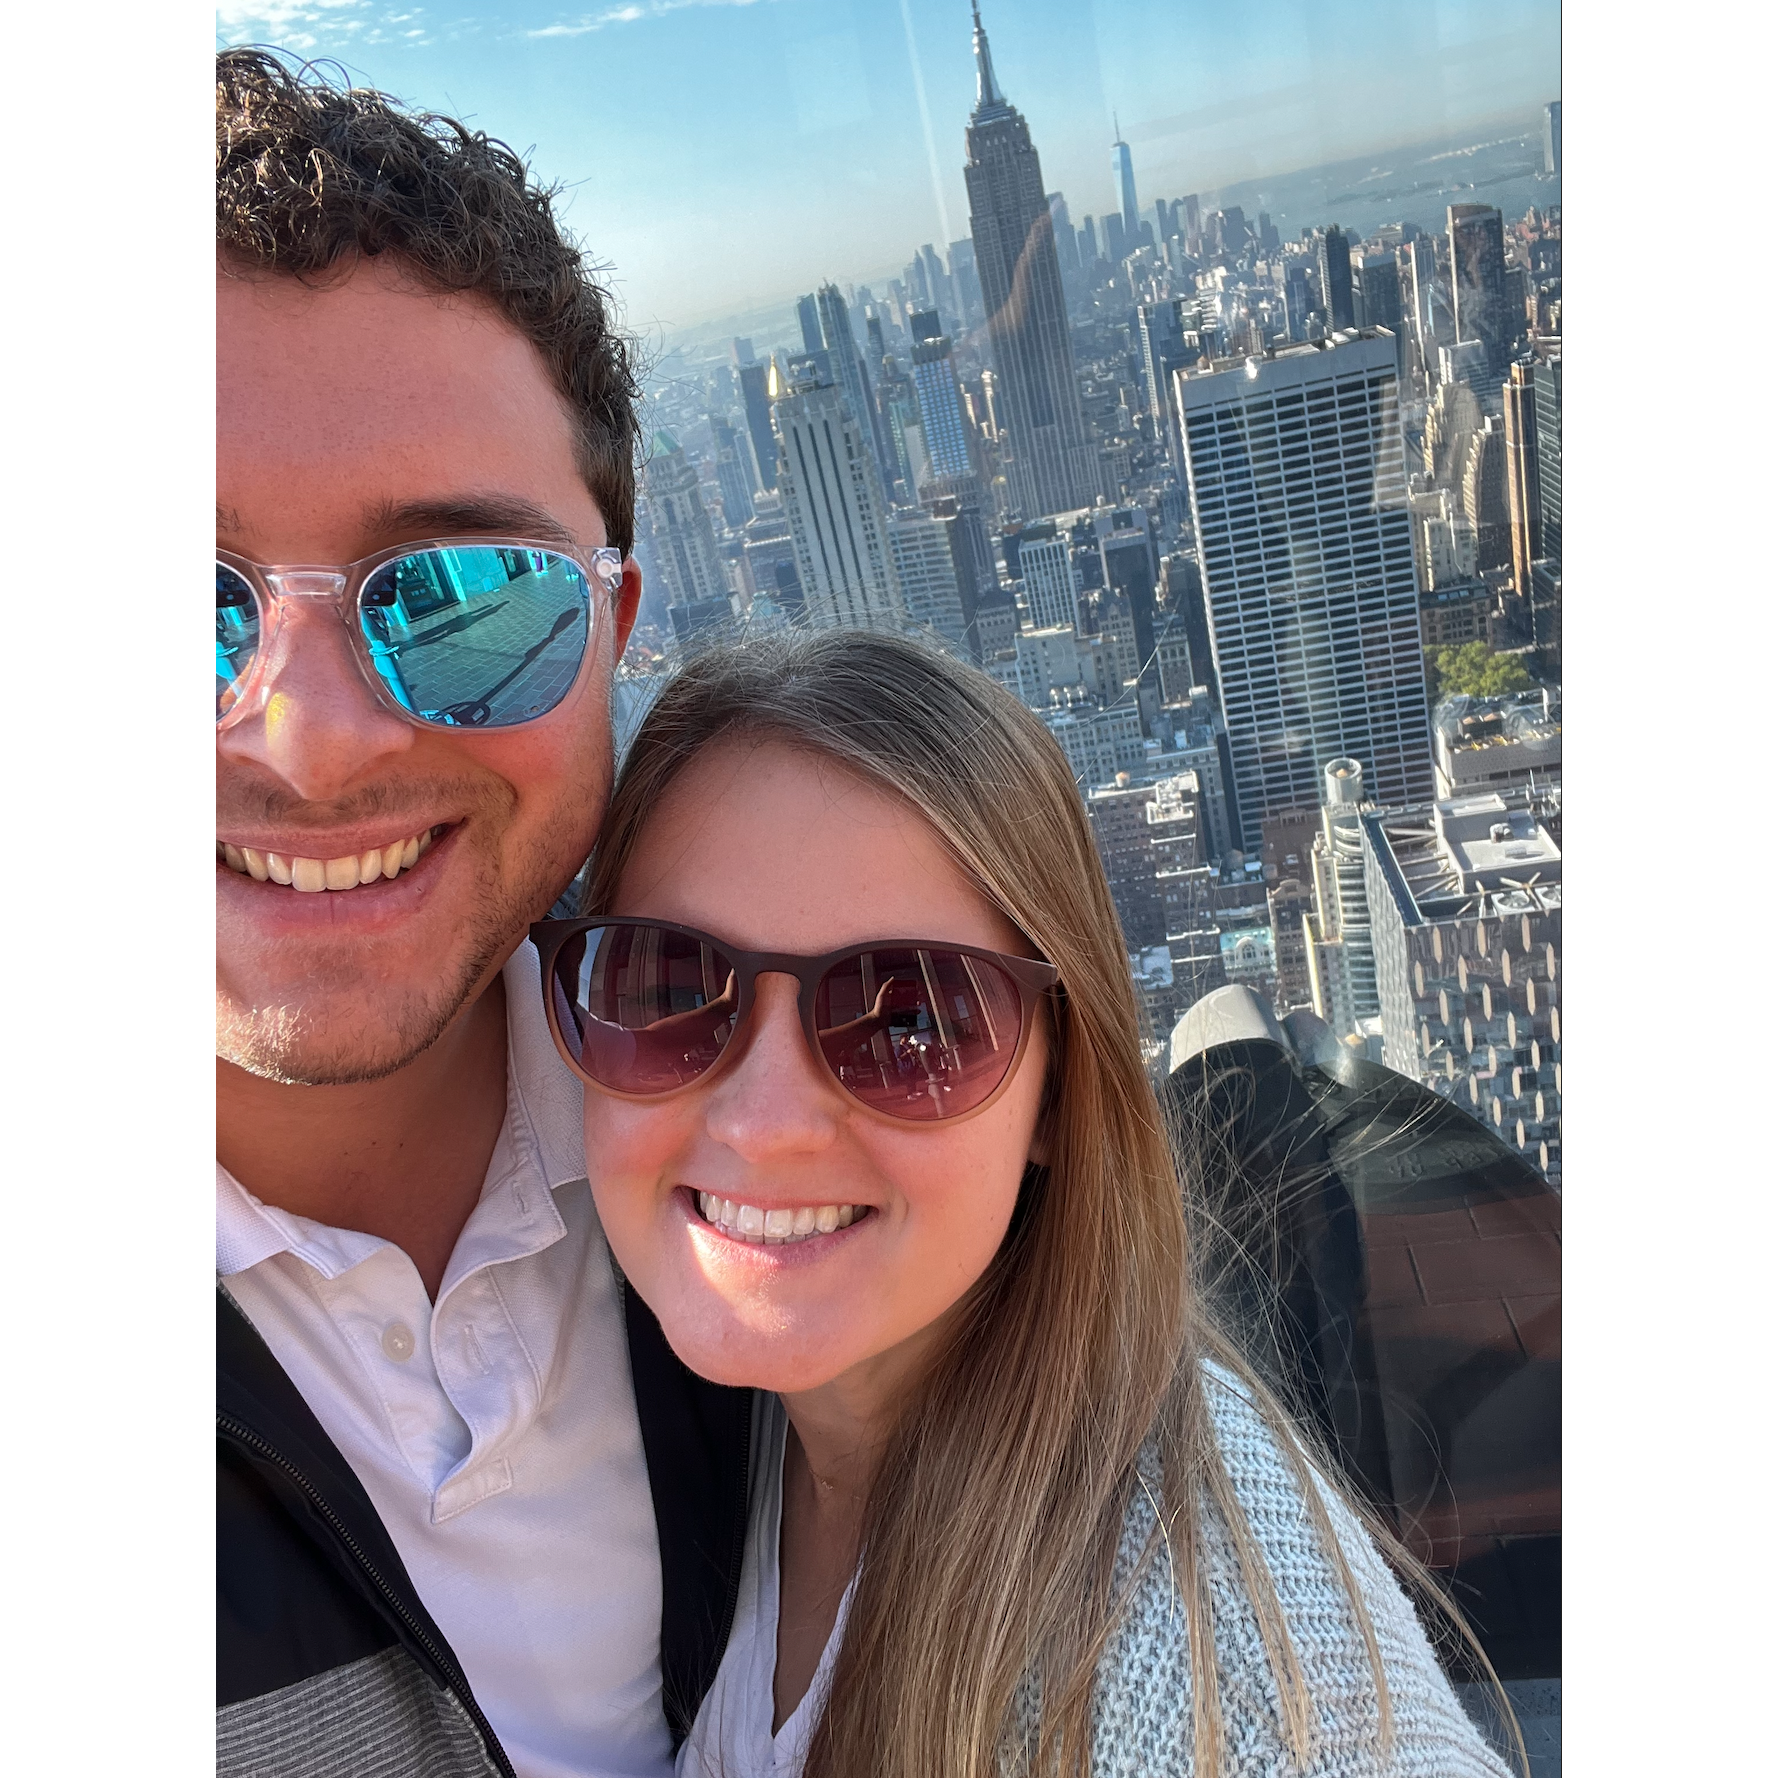 Octobrer 2022: We took a weekend trip to NYC and went to Top of the Rock!